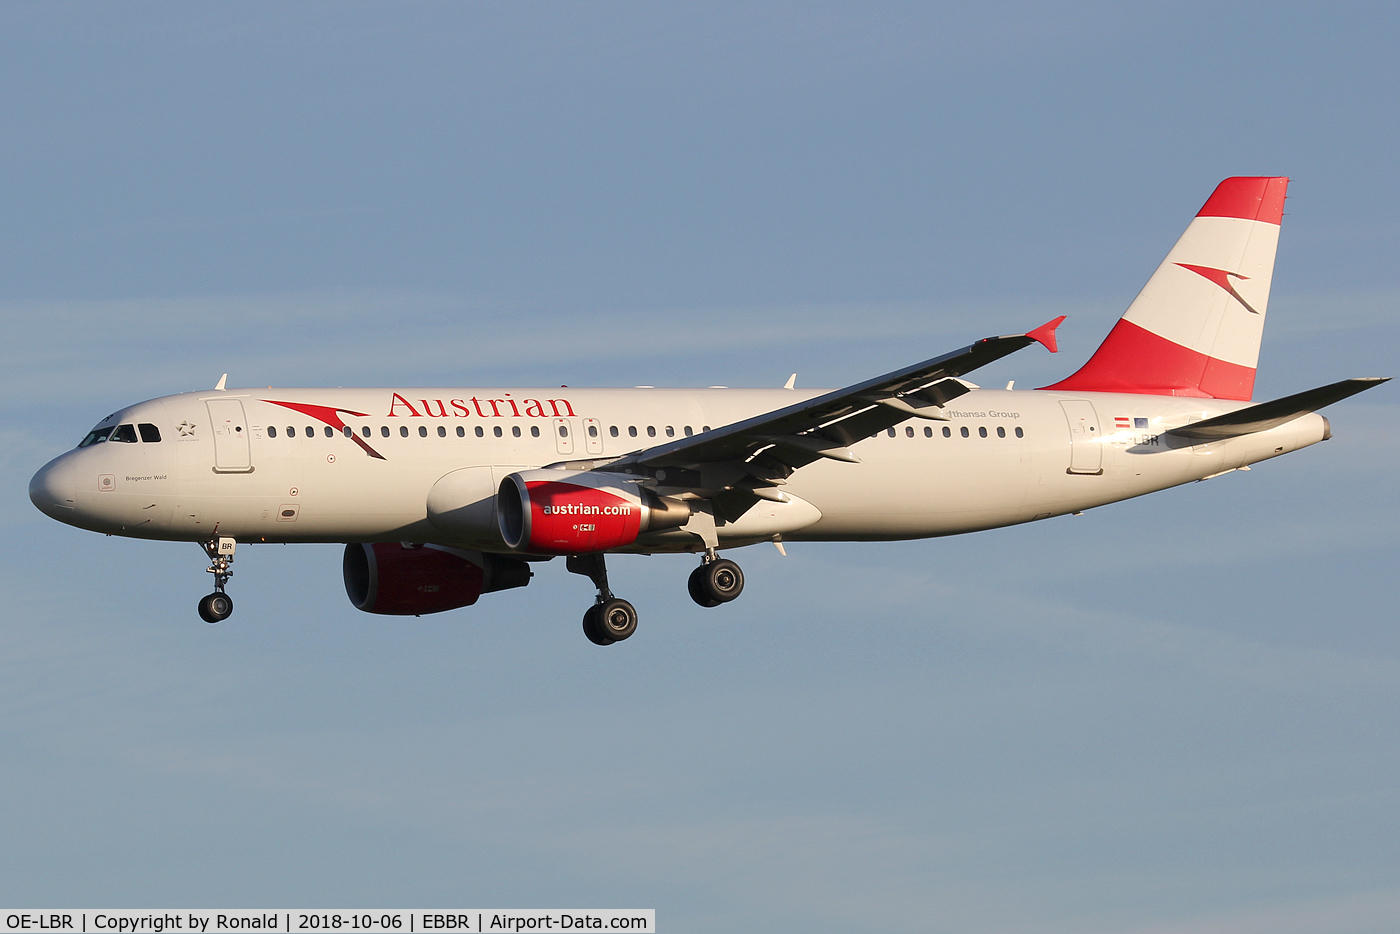 OE-LBR, 2000 Airbus A320-214 C/N 1150, at ebbr